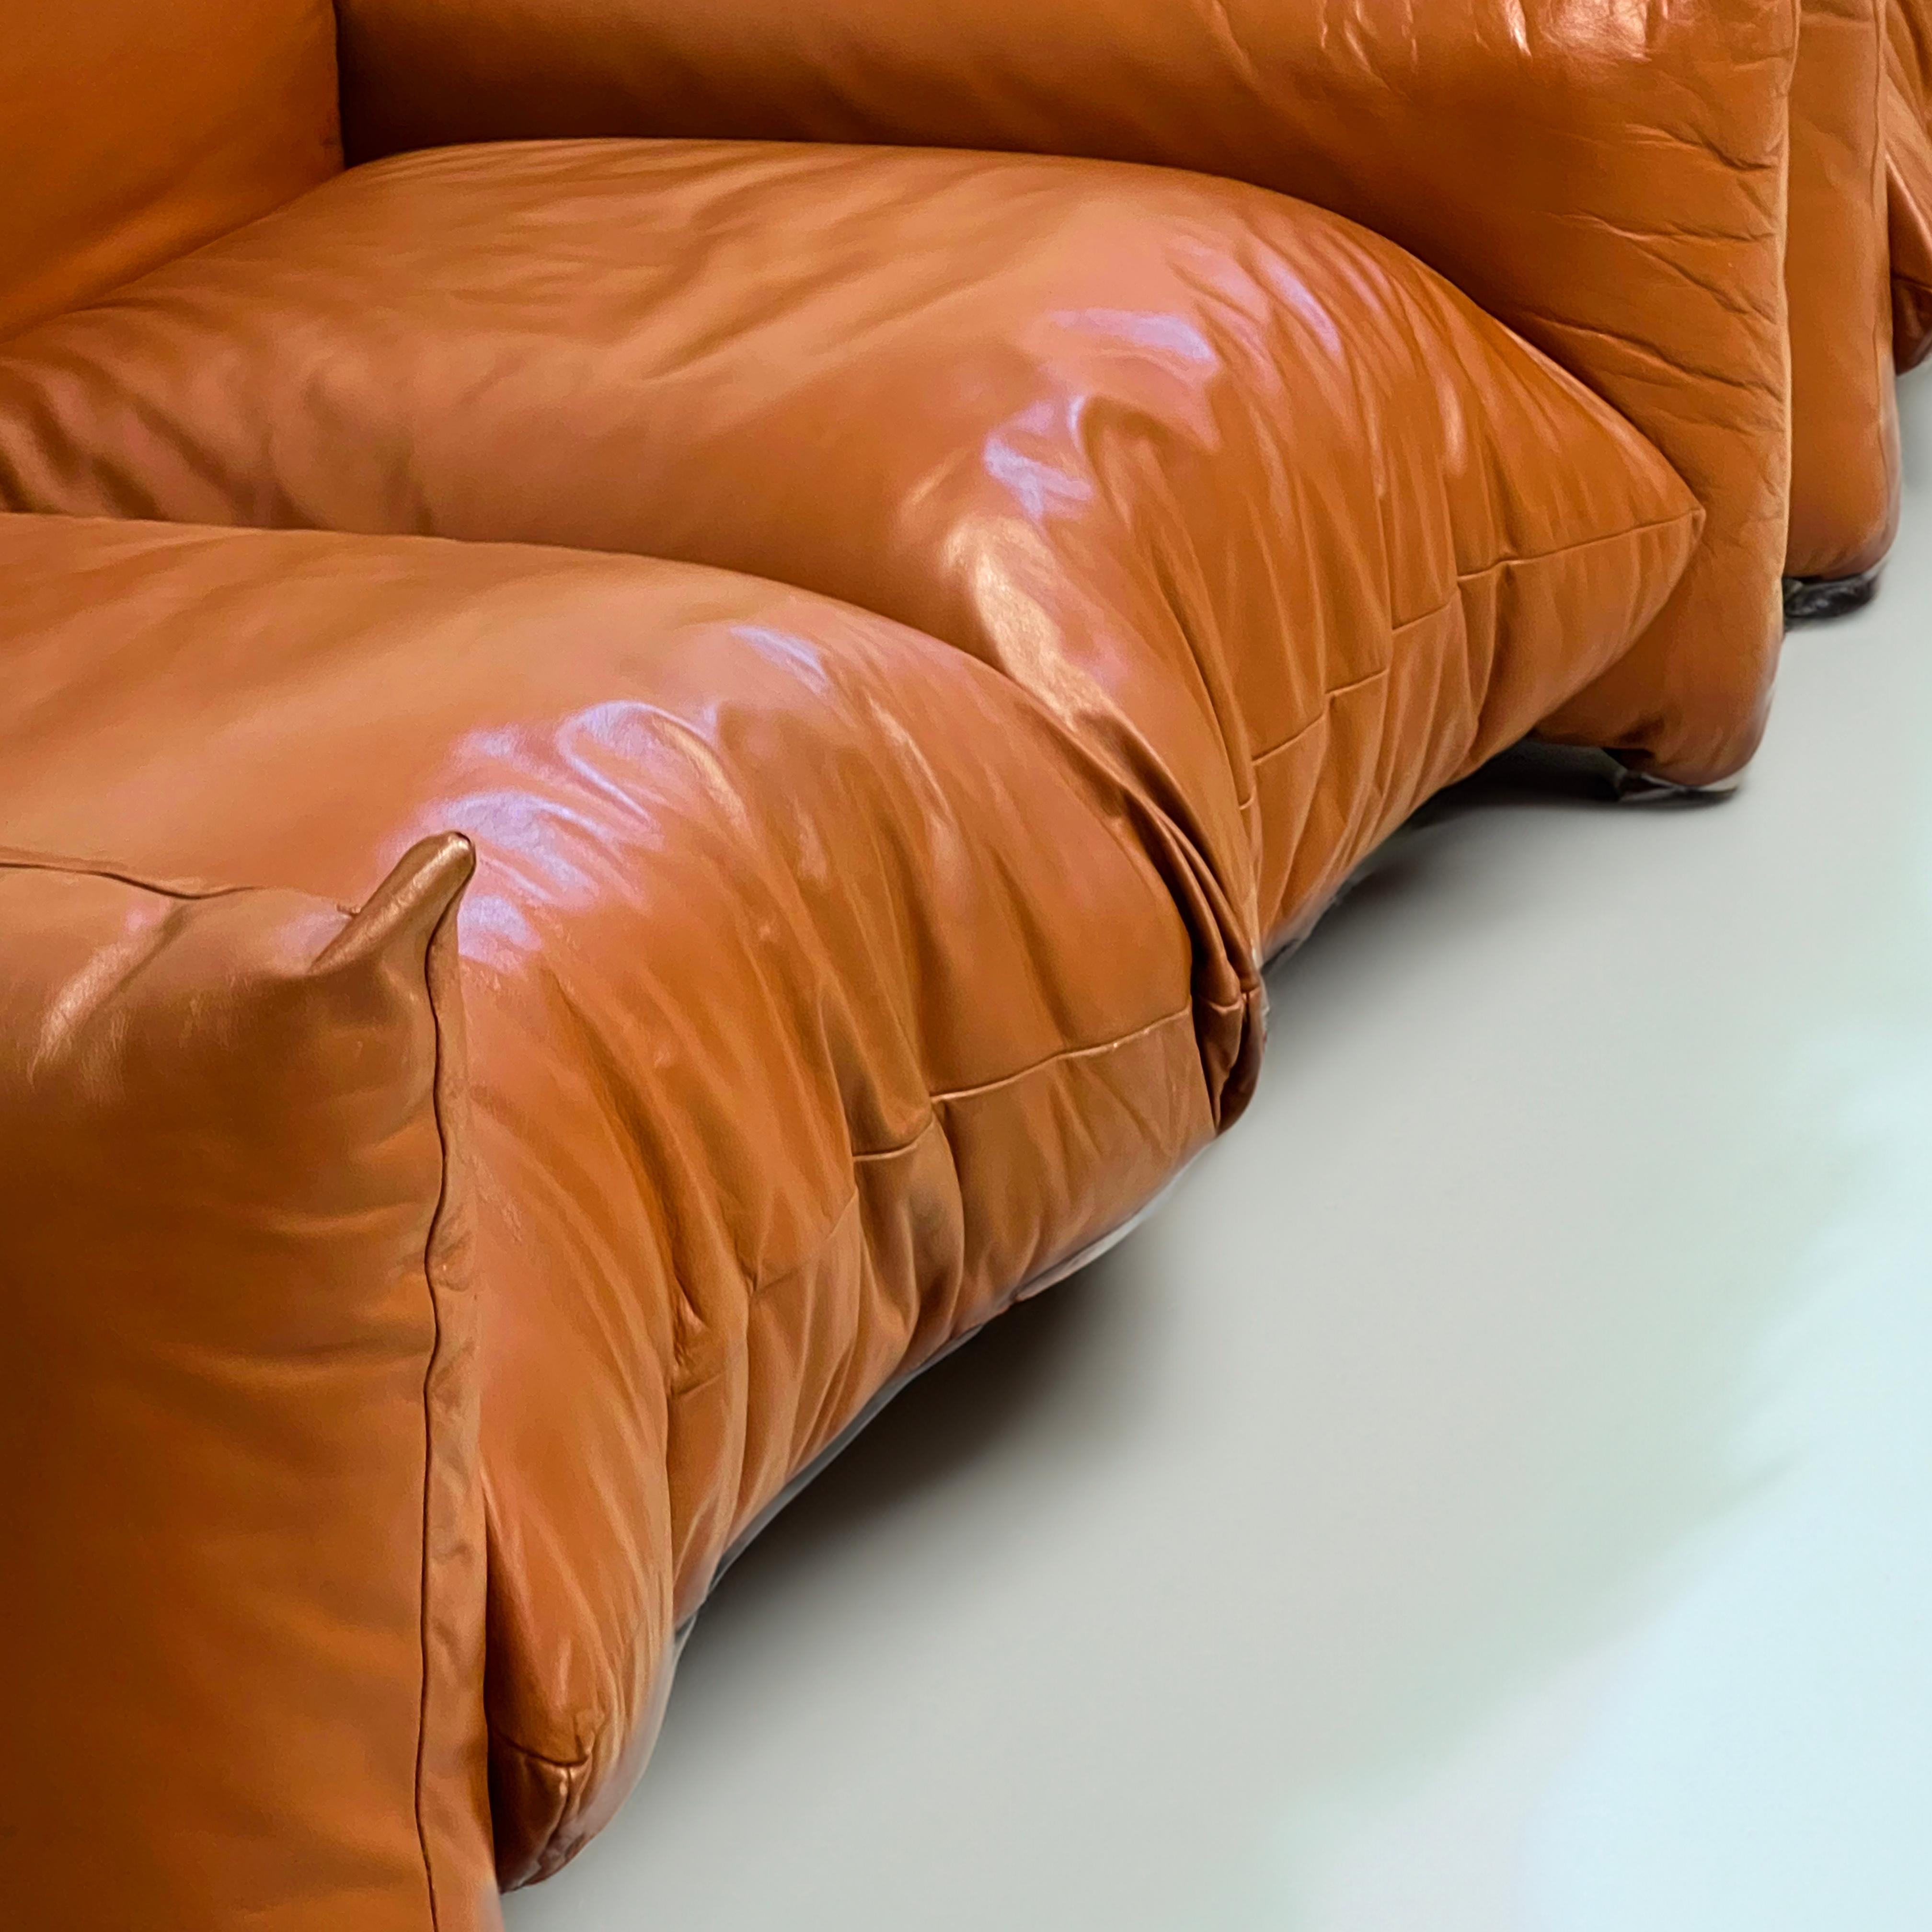 Late 20th Century “Marenco” cognac leather sofa designed by Mario Marenco for Arflex, Italy 1970s For Sale